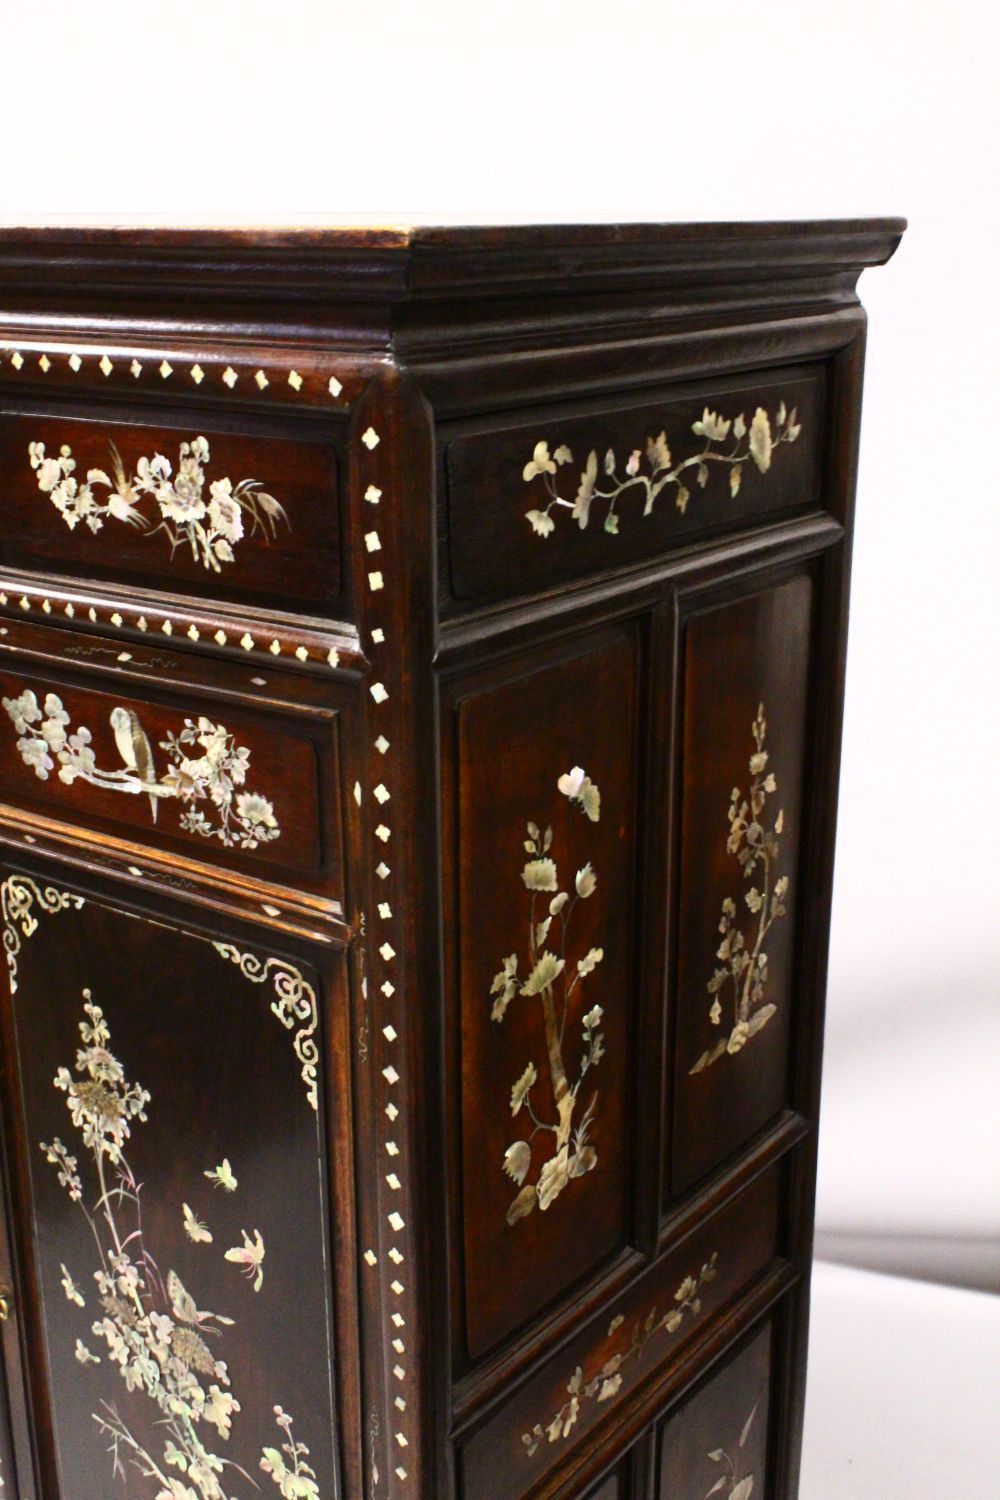 A 20TH CENTURY ROYAL VIETNAM INLAID AND SIGNED MOTHER OF PEARL CABINET, the cabinet with 9 panels of - Image 2 of 12